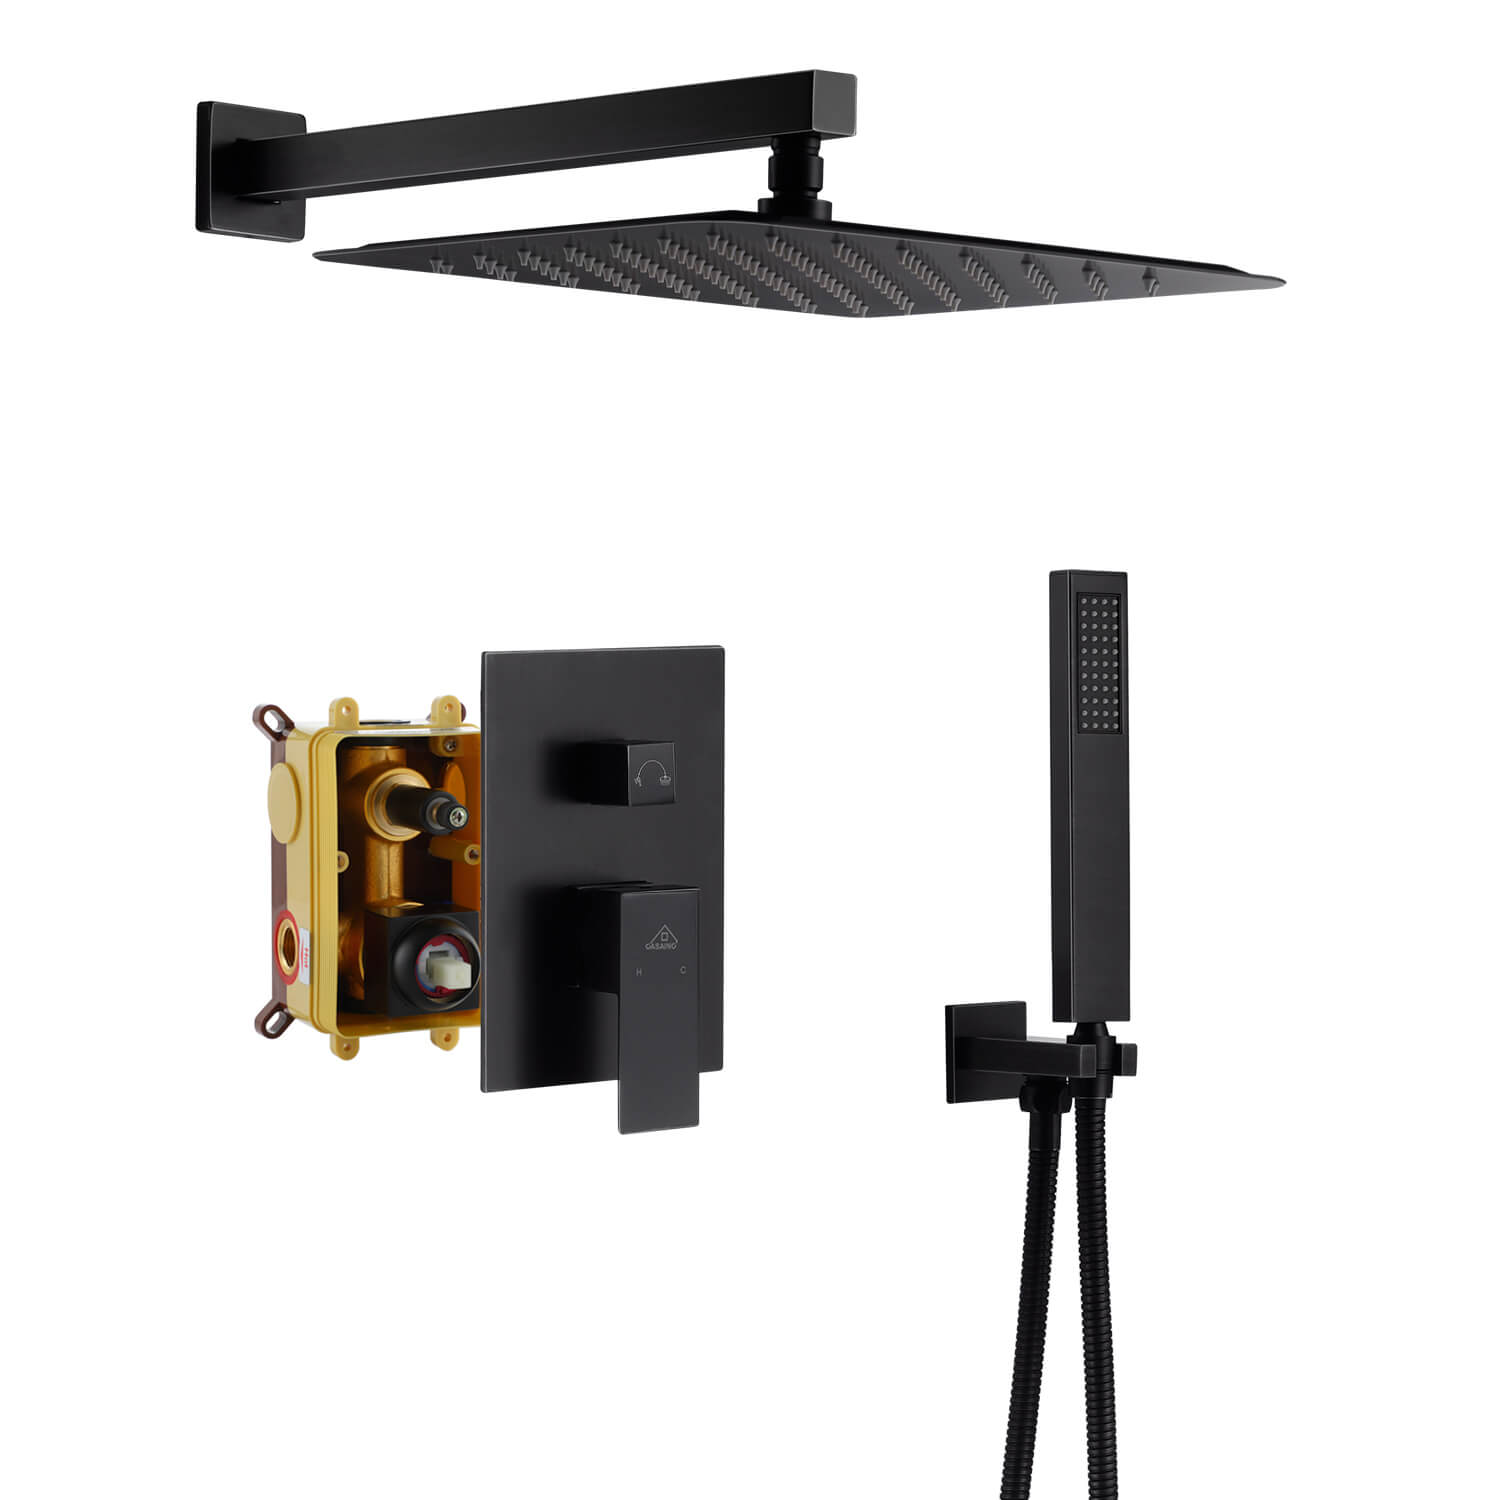 Casainc 2 Function 10" Wall Mounted Dual Shower Heads Shower System In Black-CASAINC